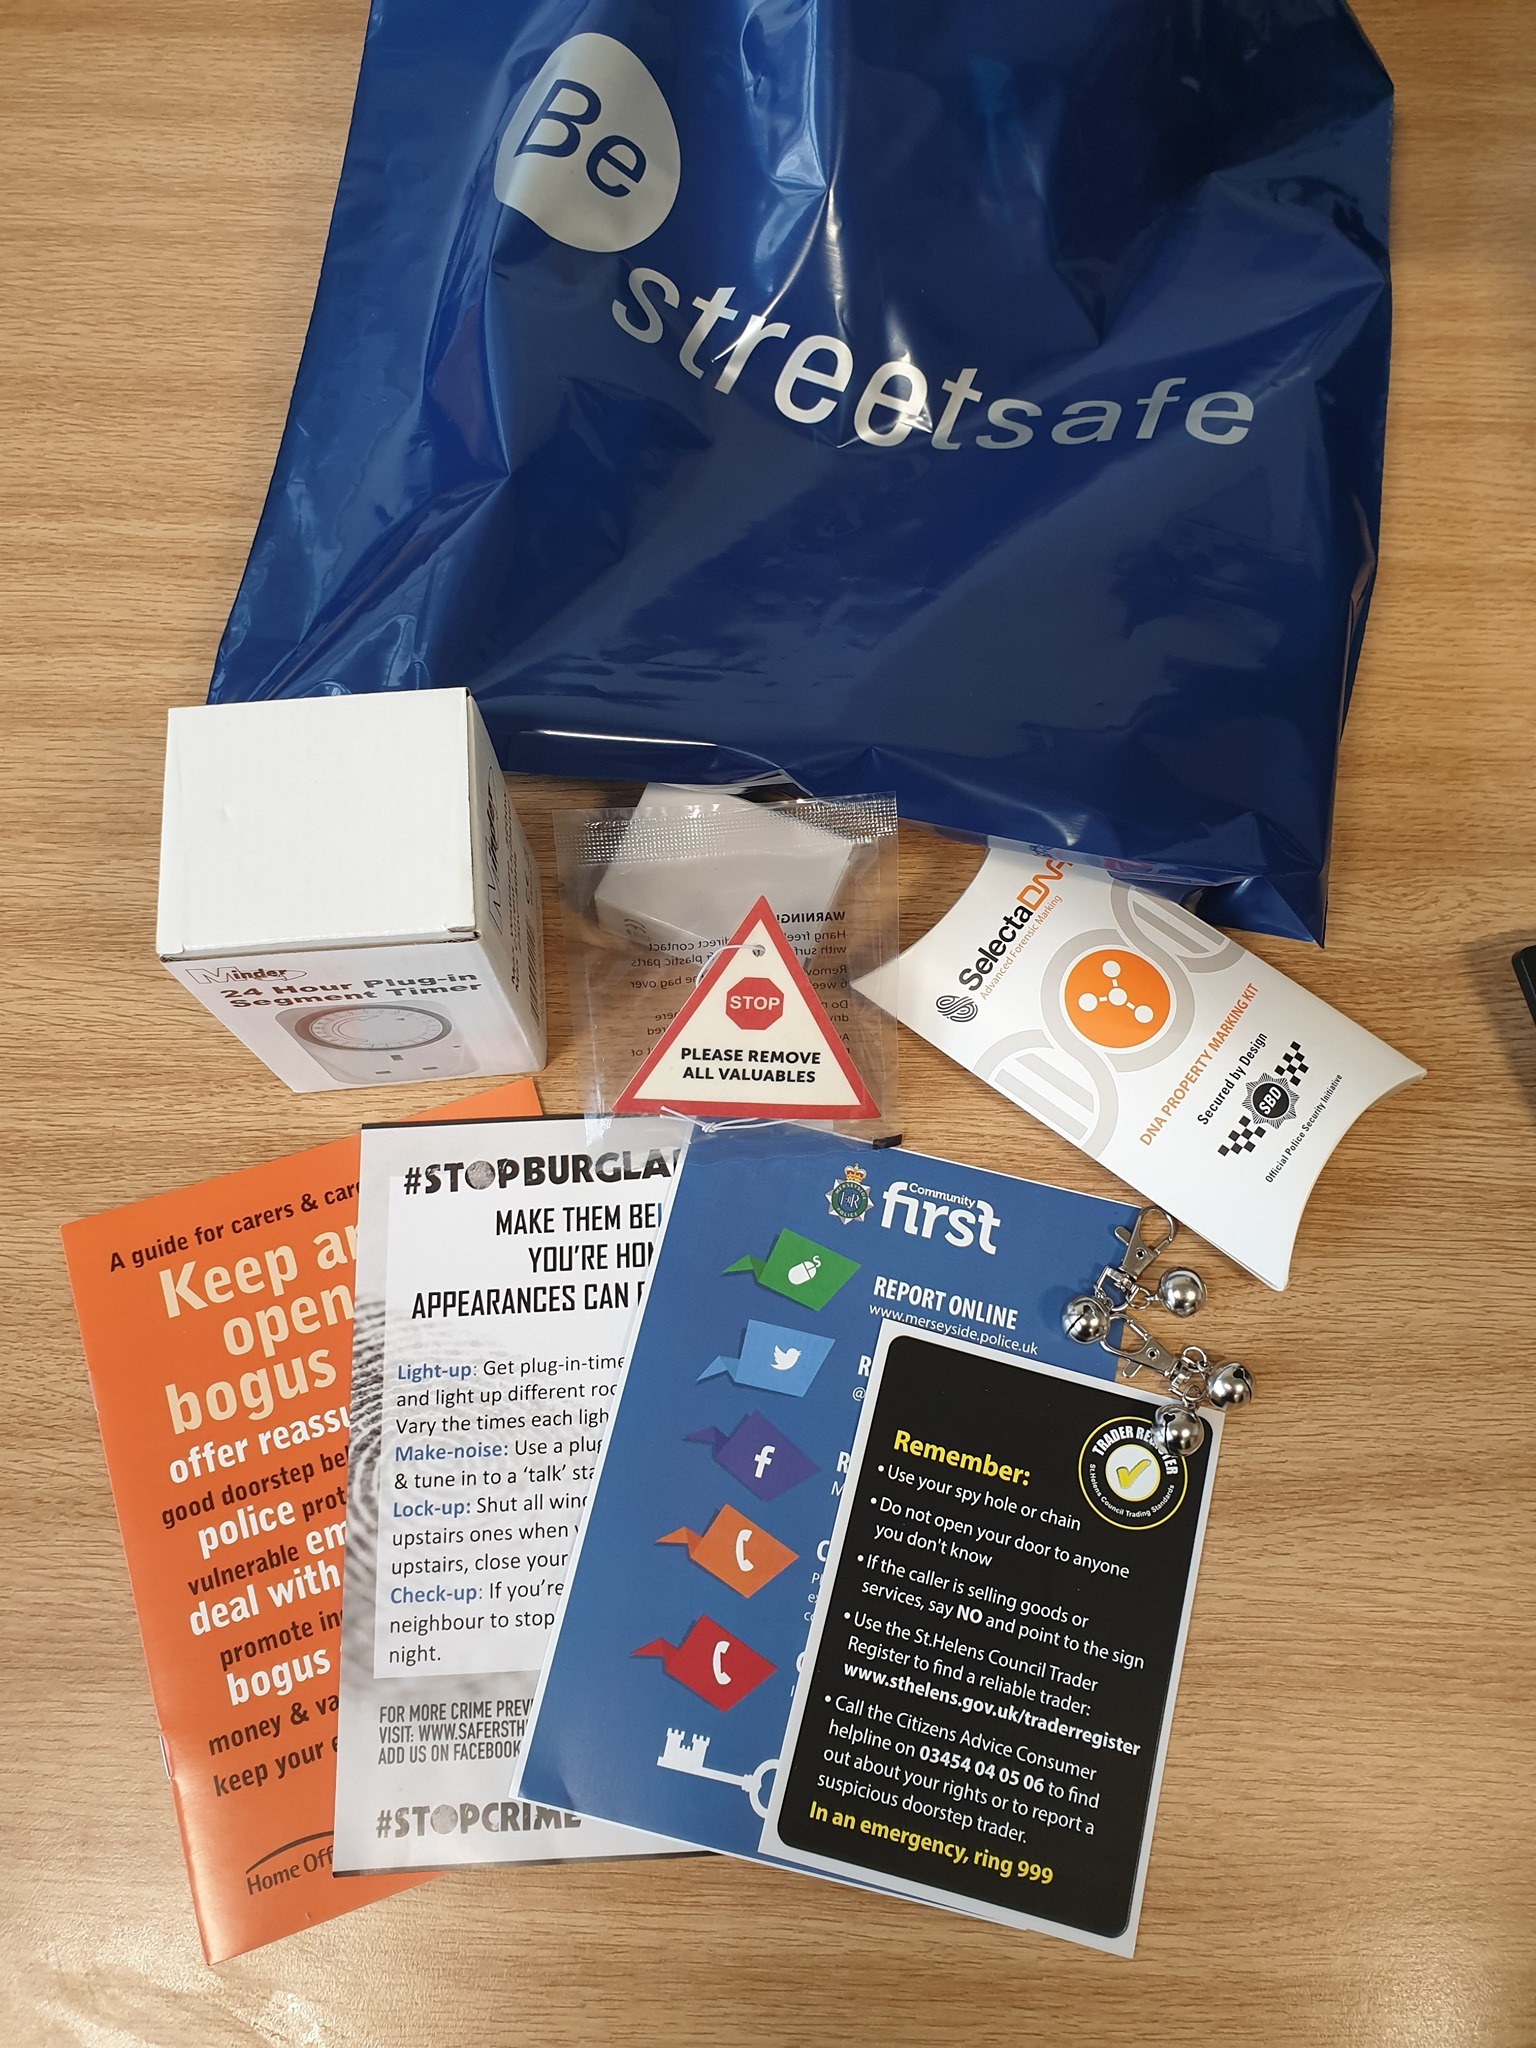 Crime prevention advice bags have been delivered Pic: St Helens Police